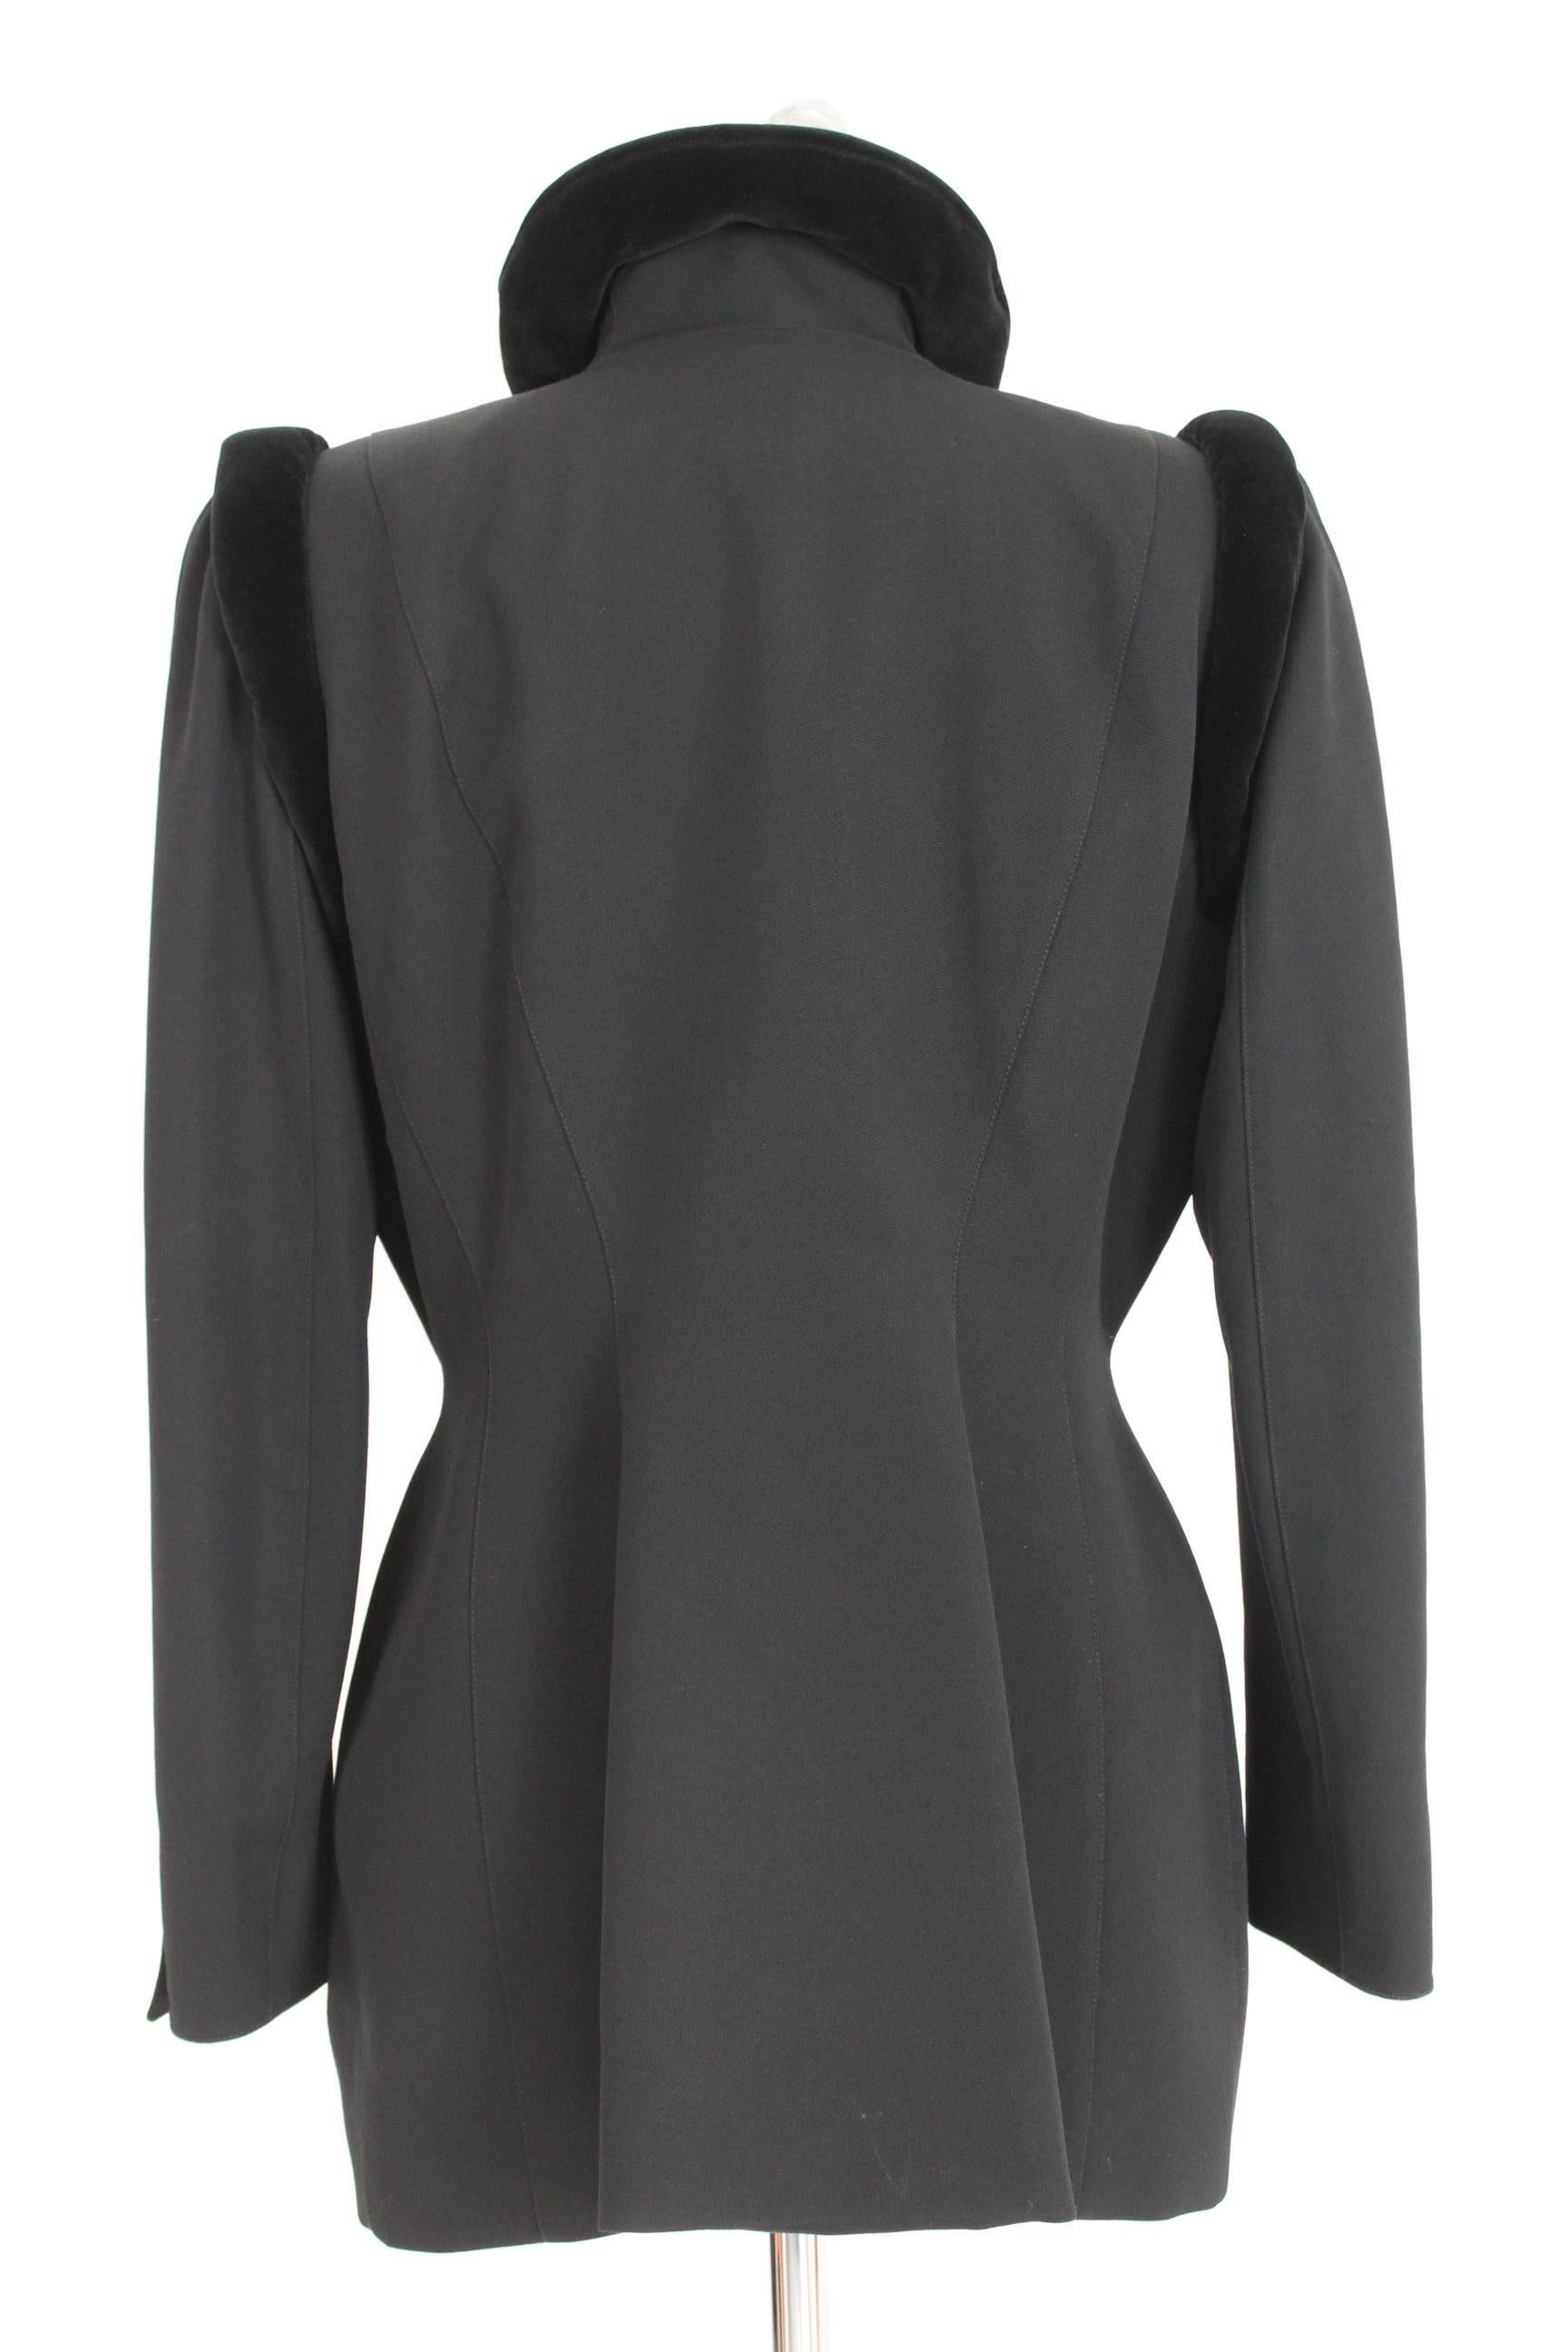 Thierry Mugler vintage women's 80s jacket. Double-breasted, black in 100% wool combed. Details in velvet. Elegant structured blazer. Space, futuristic design on the shoulders. Closure with clip buttons. Lined interior. Made in France. Excellent